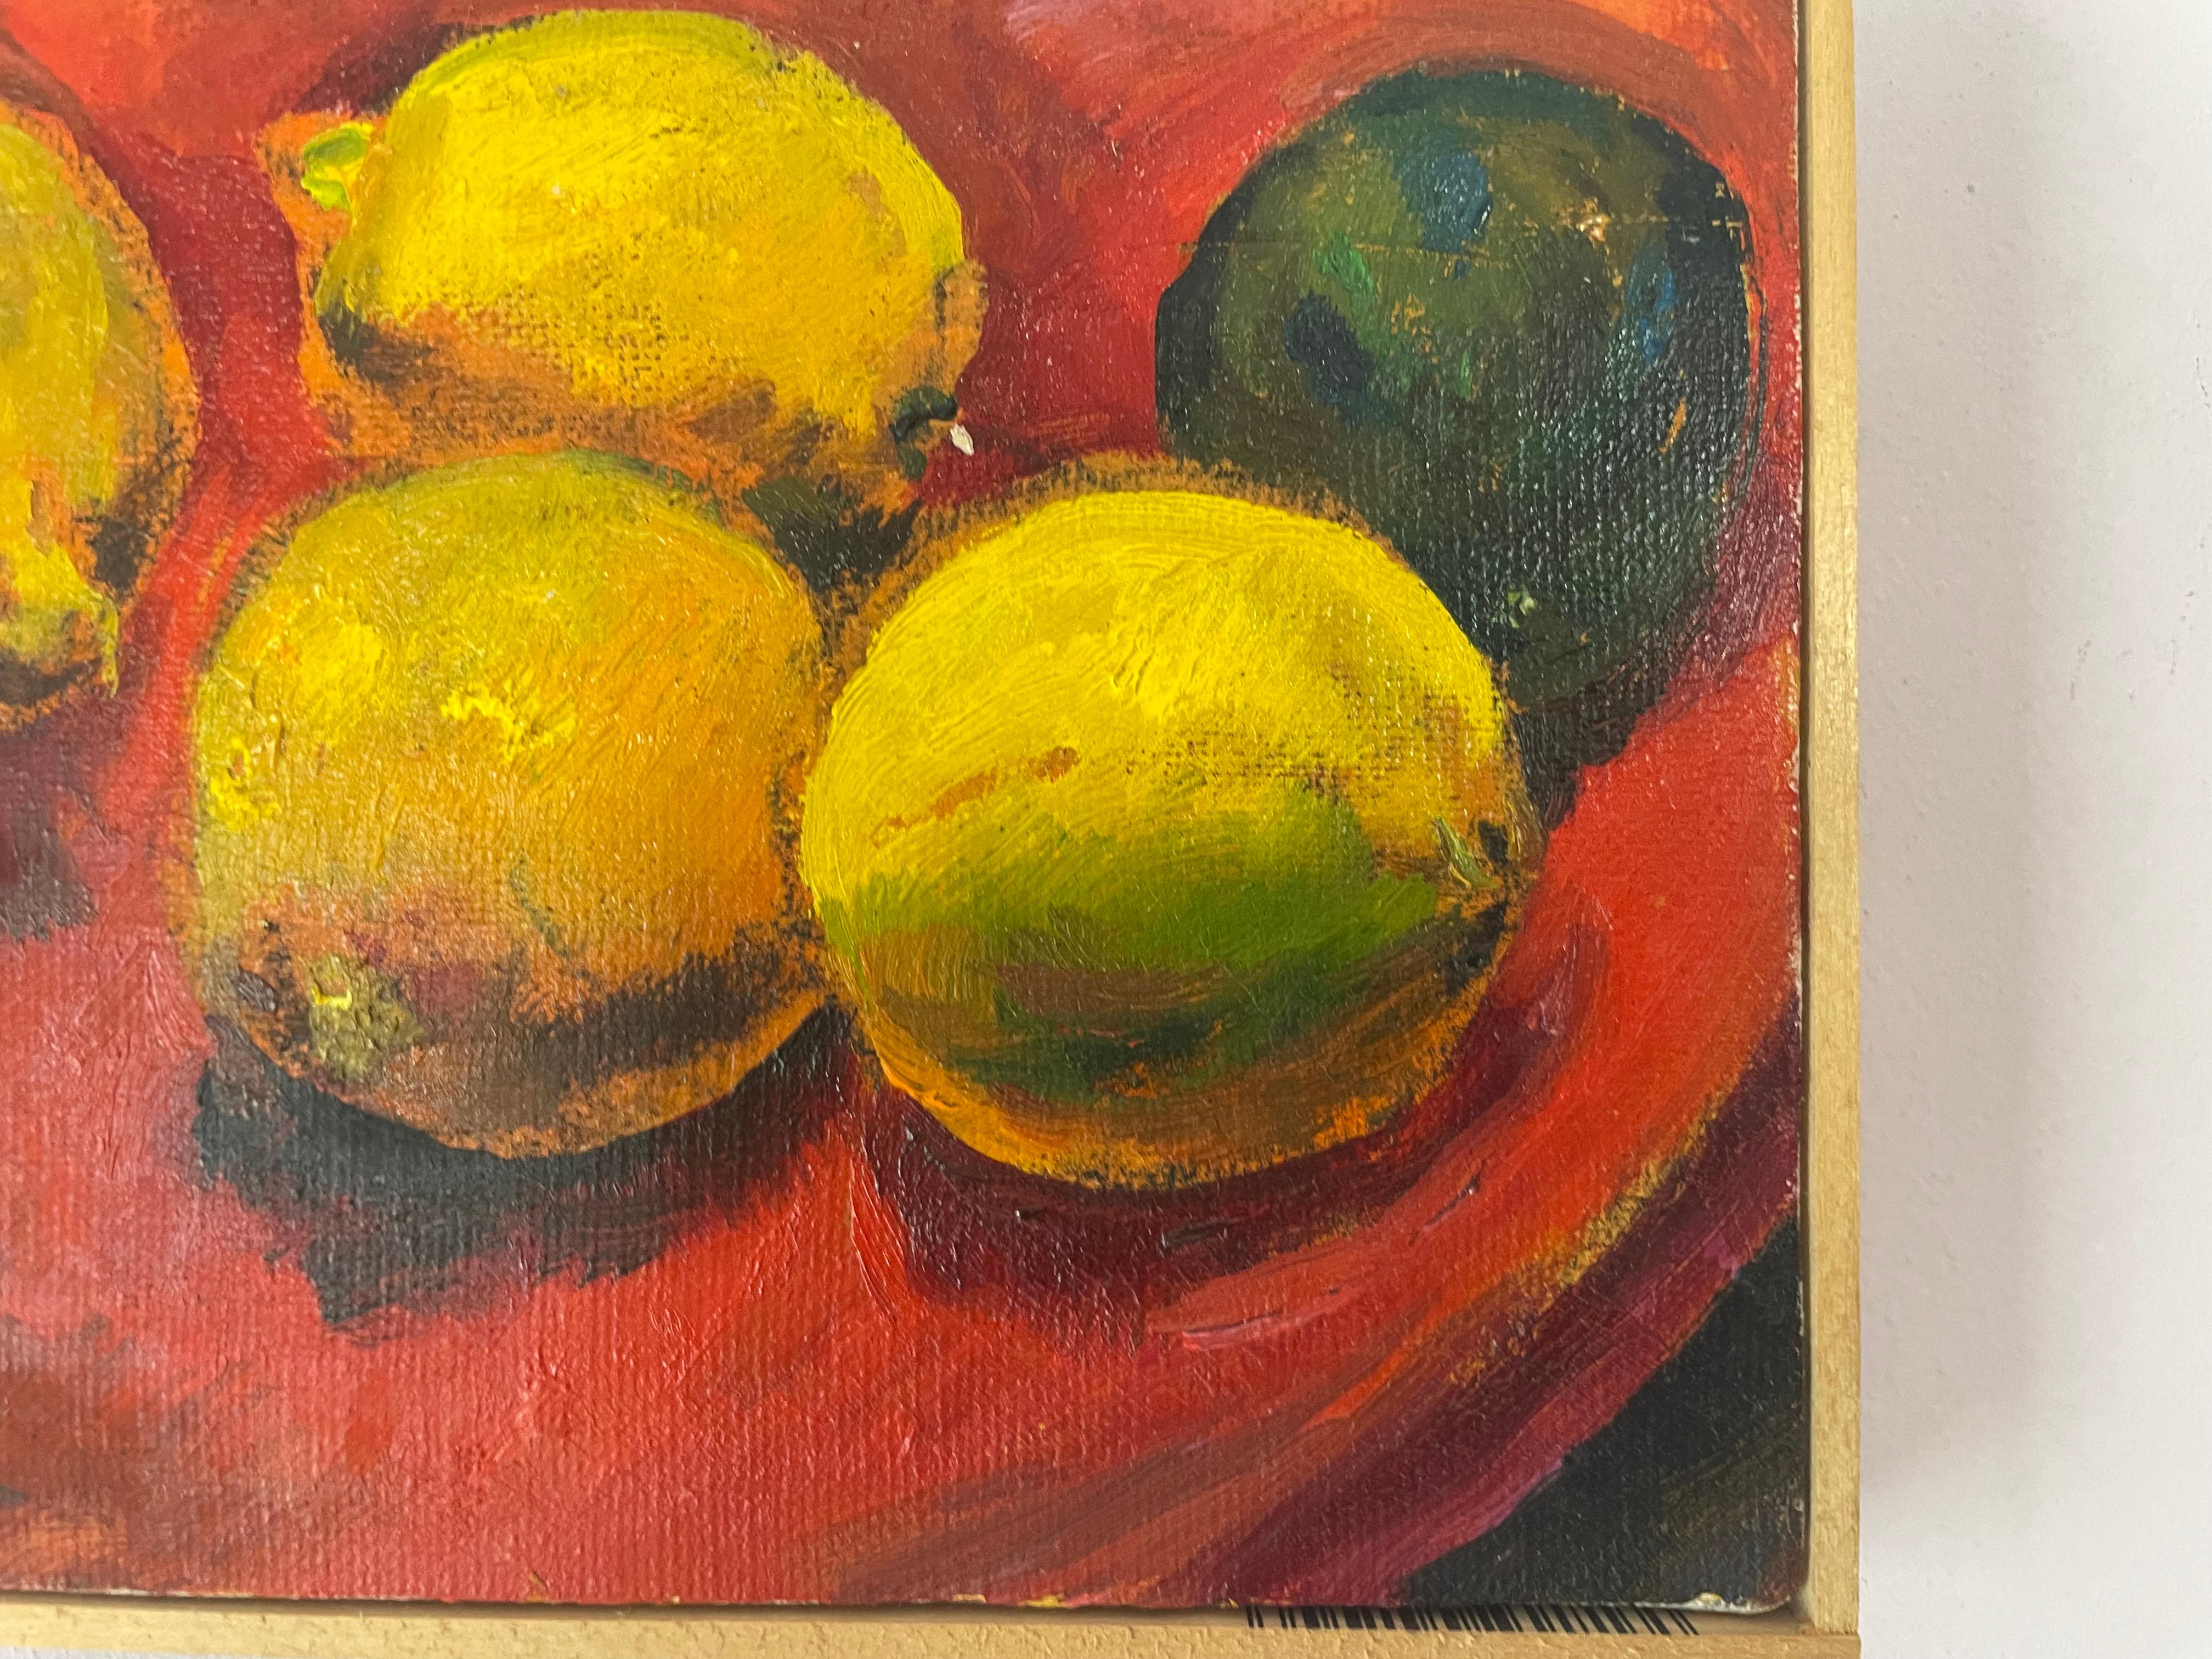 Lemons and lime - Painting by Ronald Shap